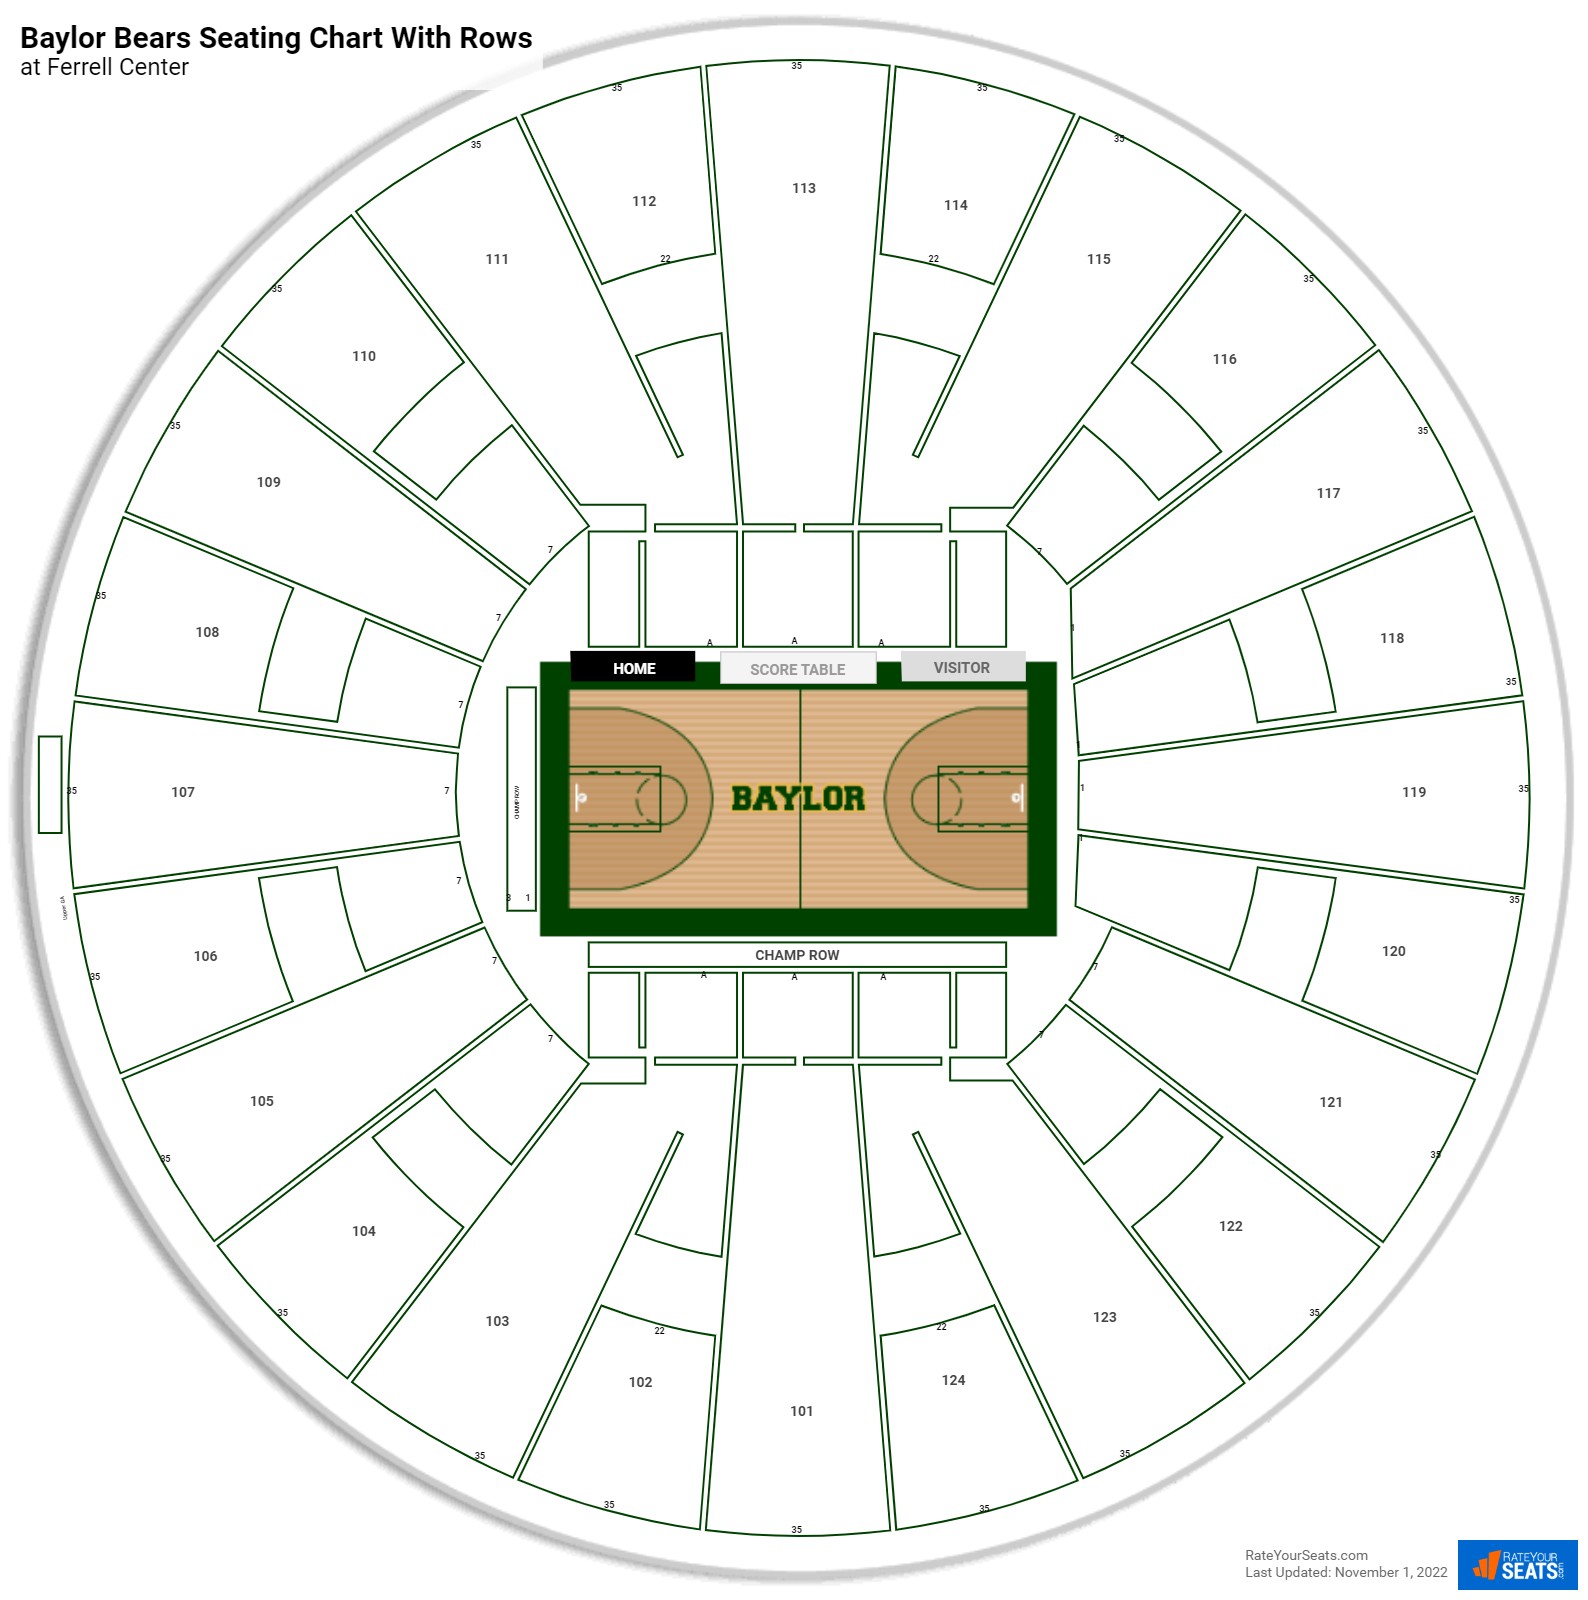 Ferrell Center seating chart with row numbers